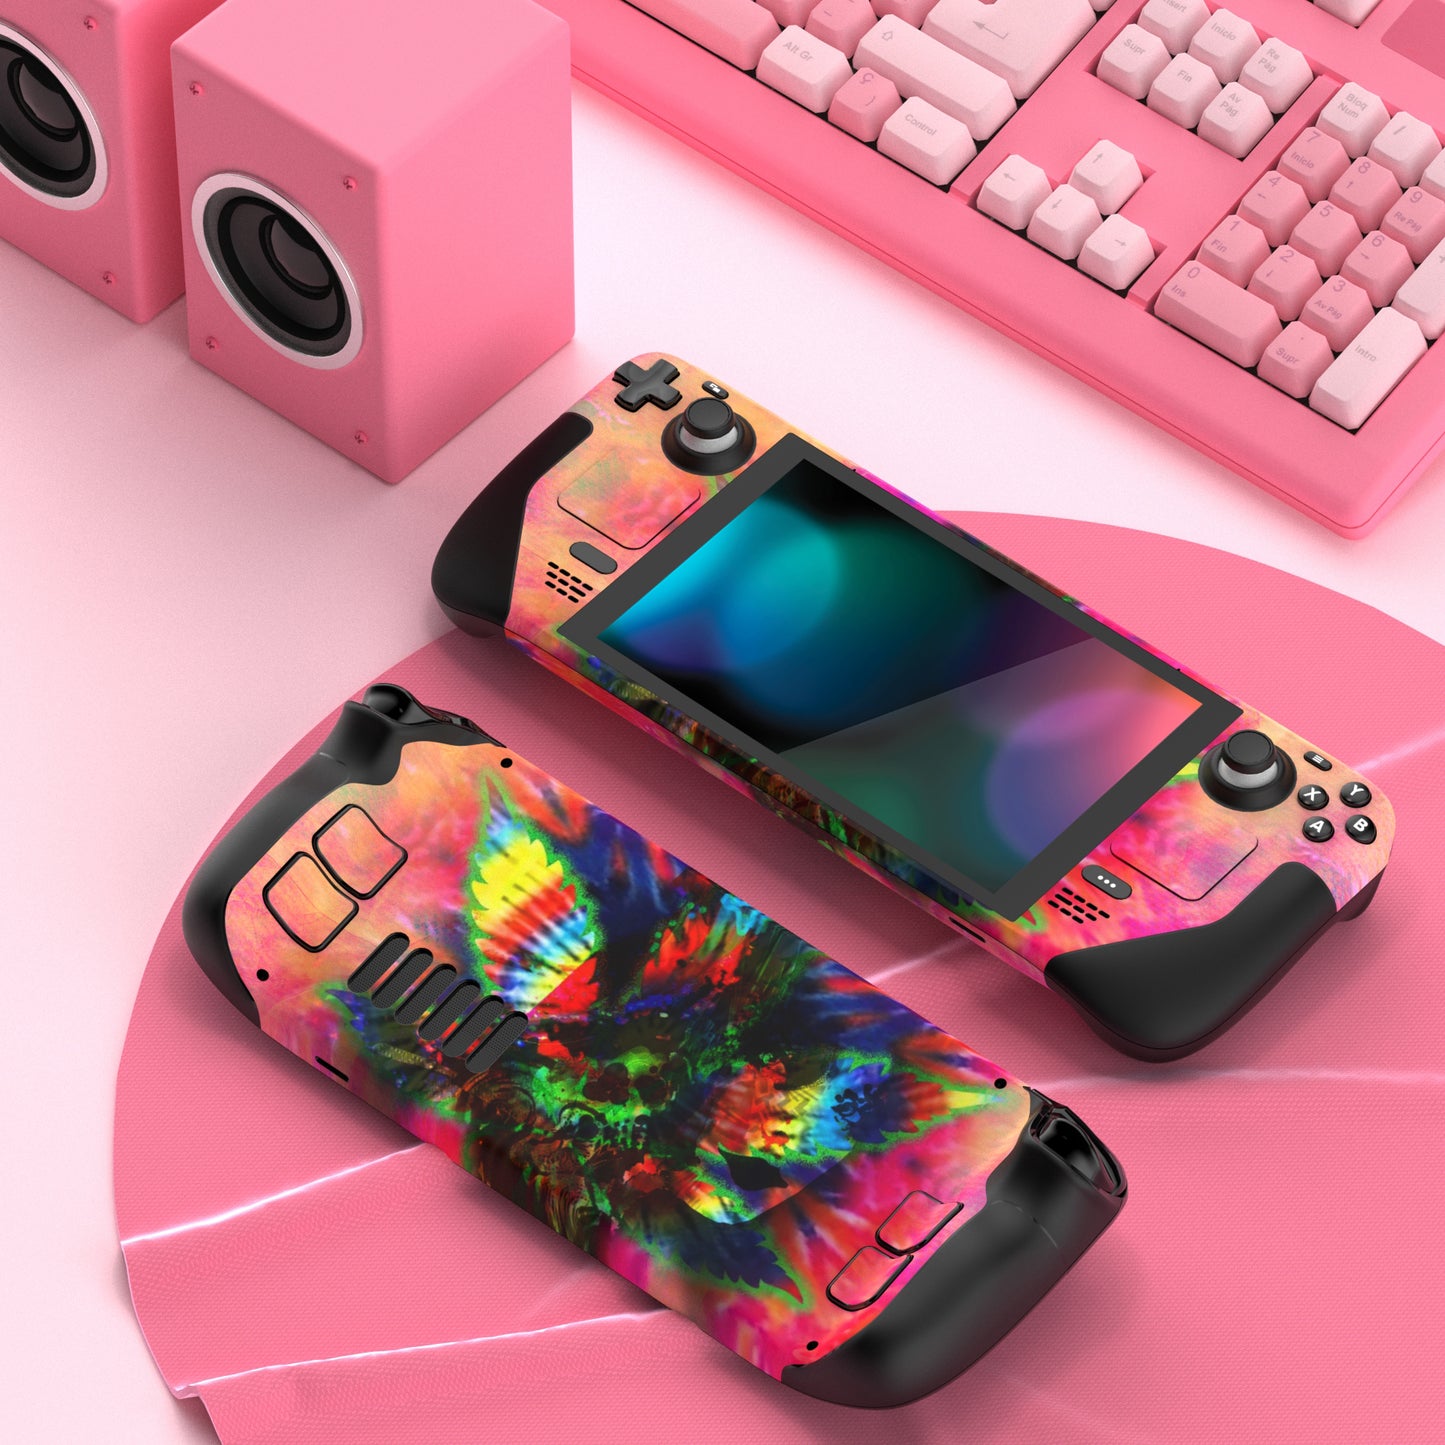 PlayVital Full Set Protective Skin Decal for Steam Deck, Custom Stickers Vinyl Cover for Steam Deck Handheld Gaming PC - Pink Colorful Leaf - SDTM055 PlayVital